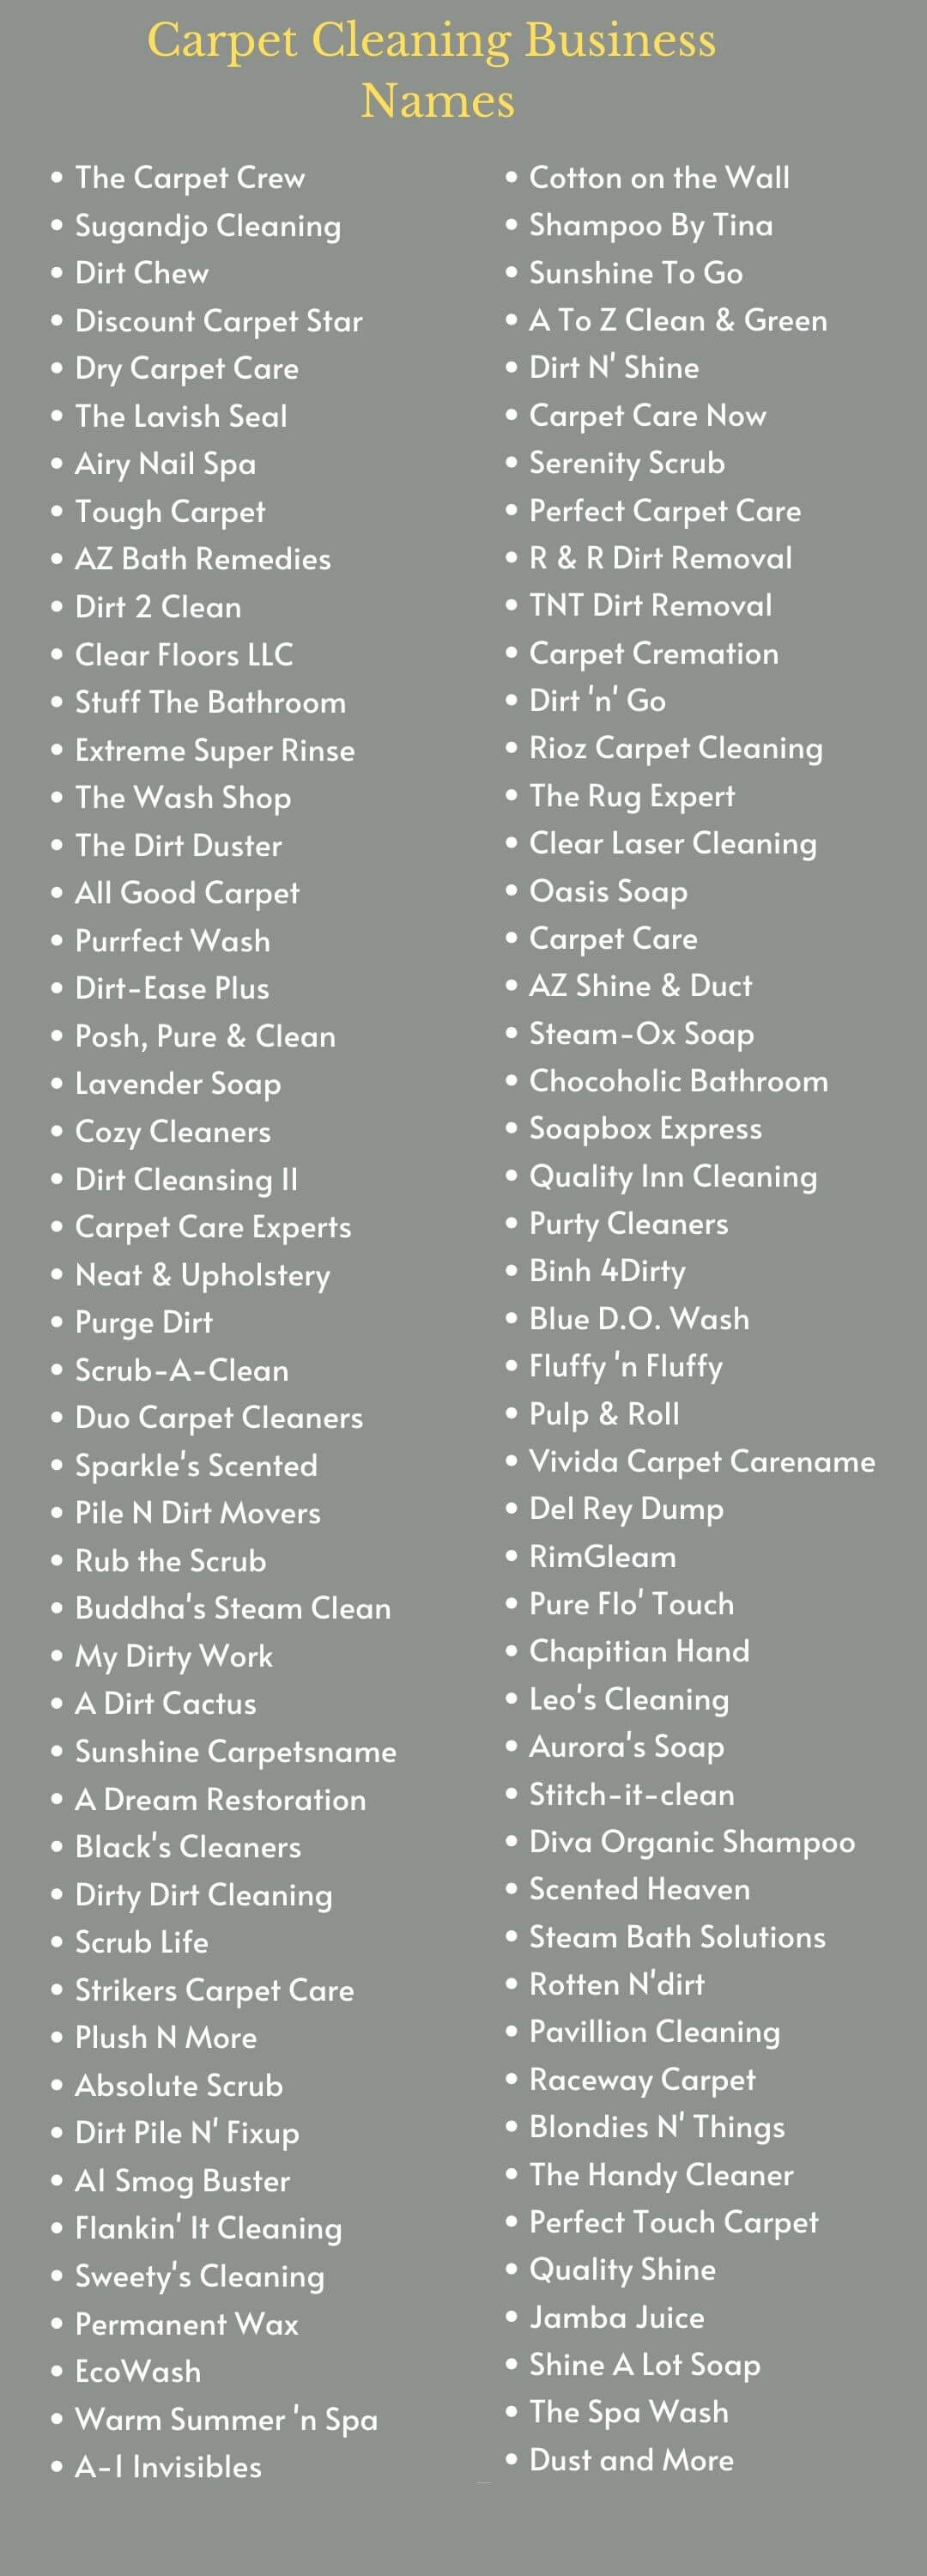 Carpet Cleaning Business Names: Infographic